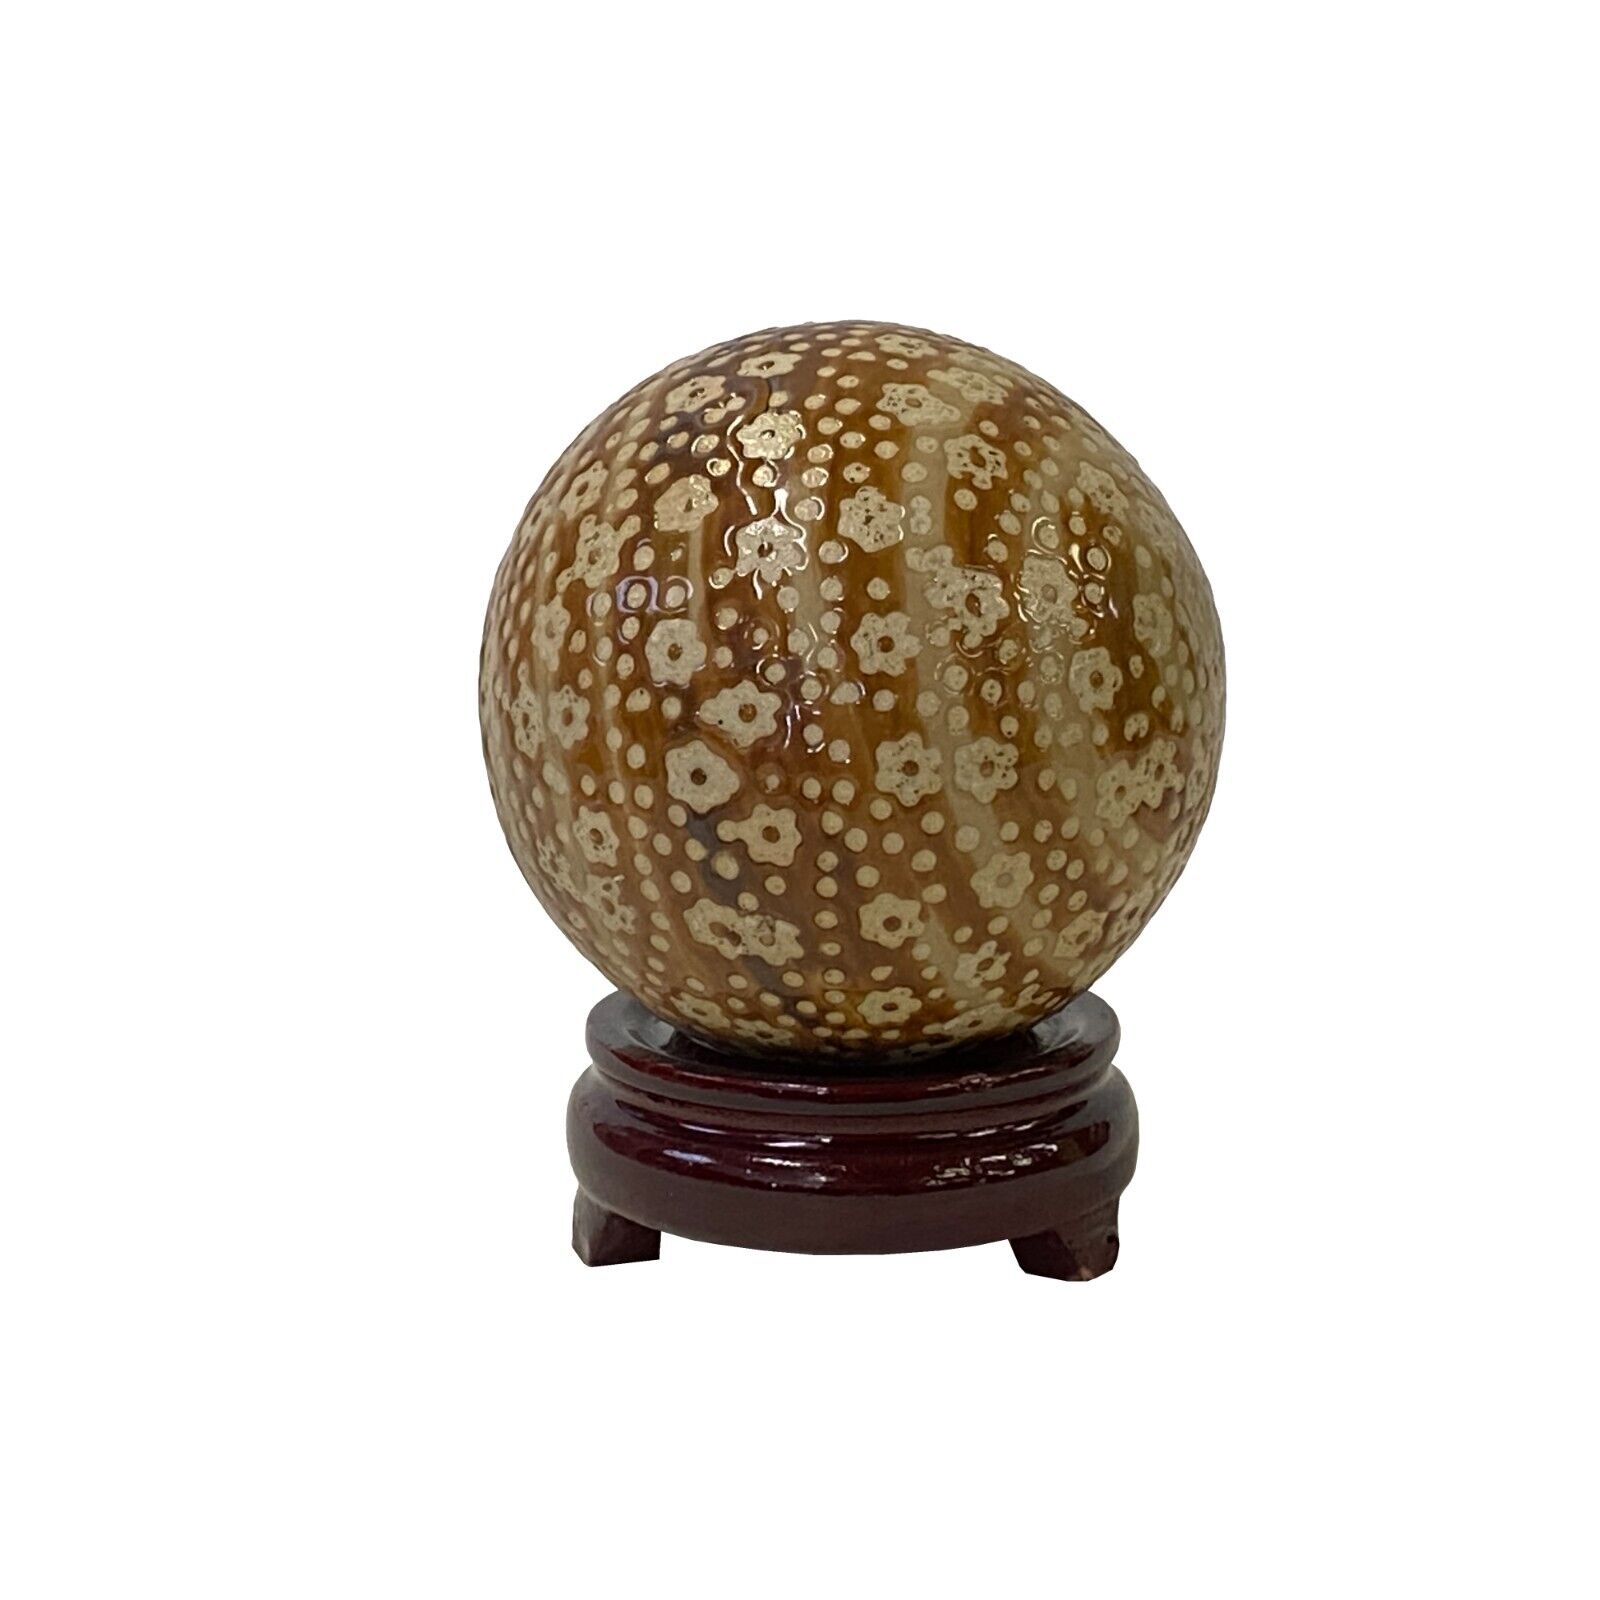 Tan Beige Brown Mix Color Dots Floral Porcelain Round Ball Display Art ws3802